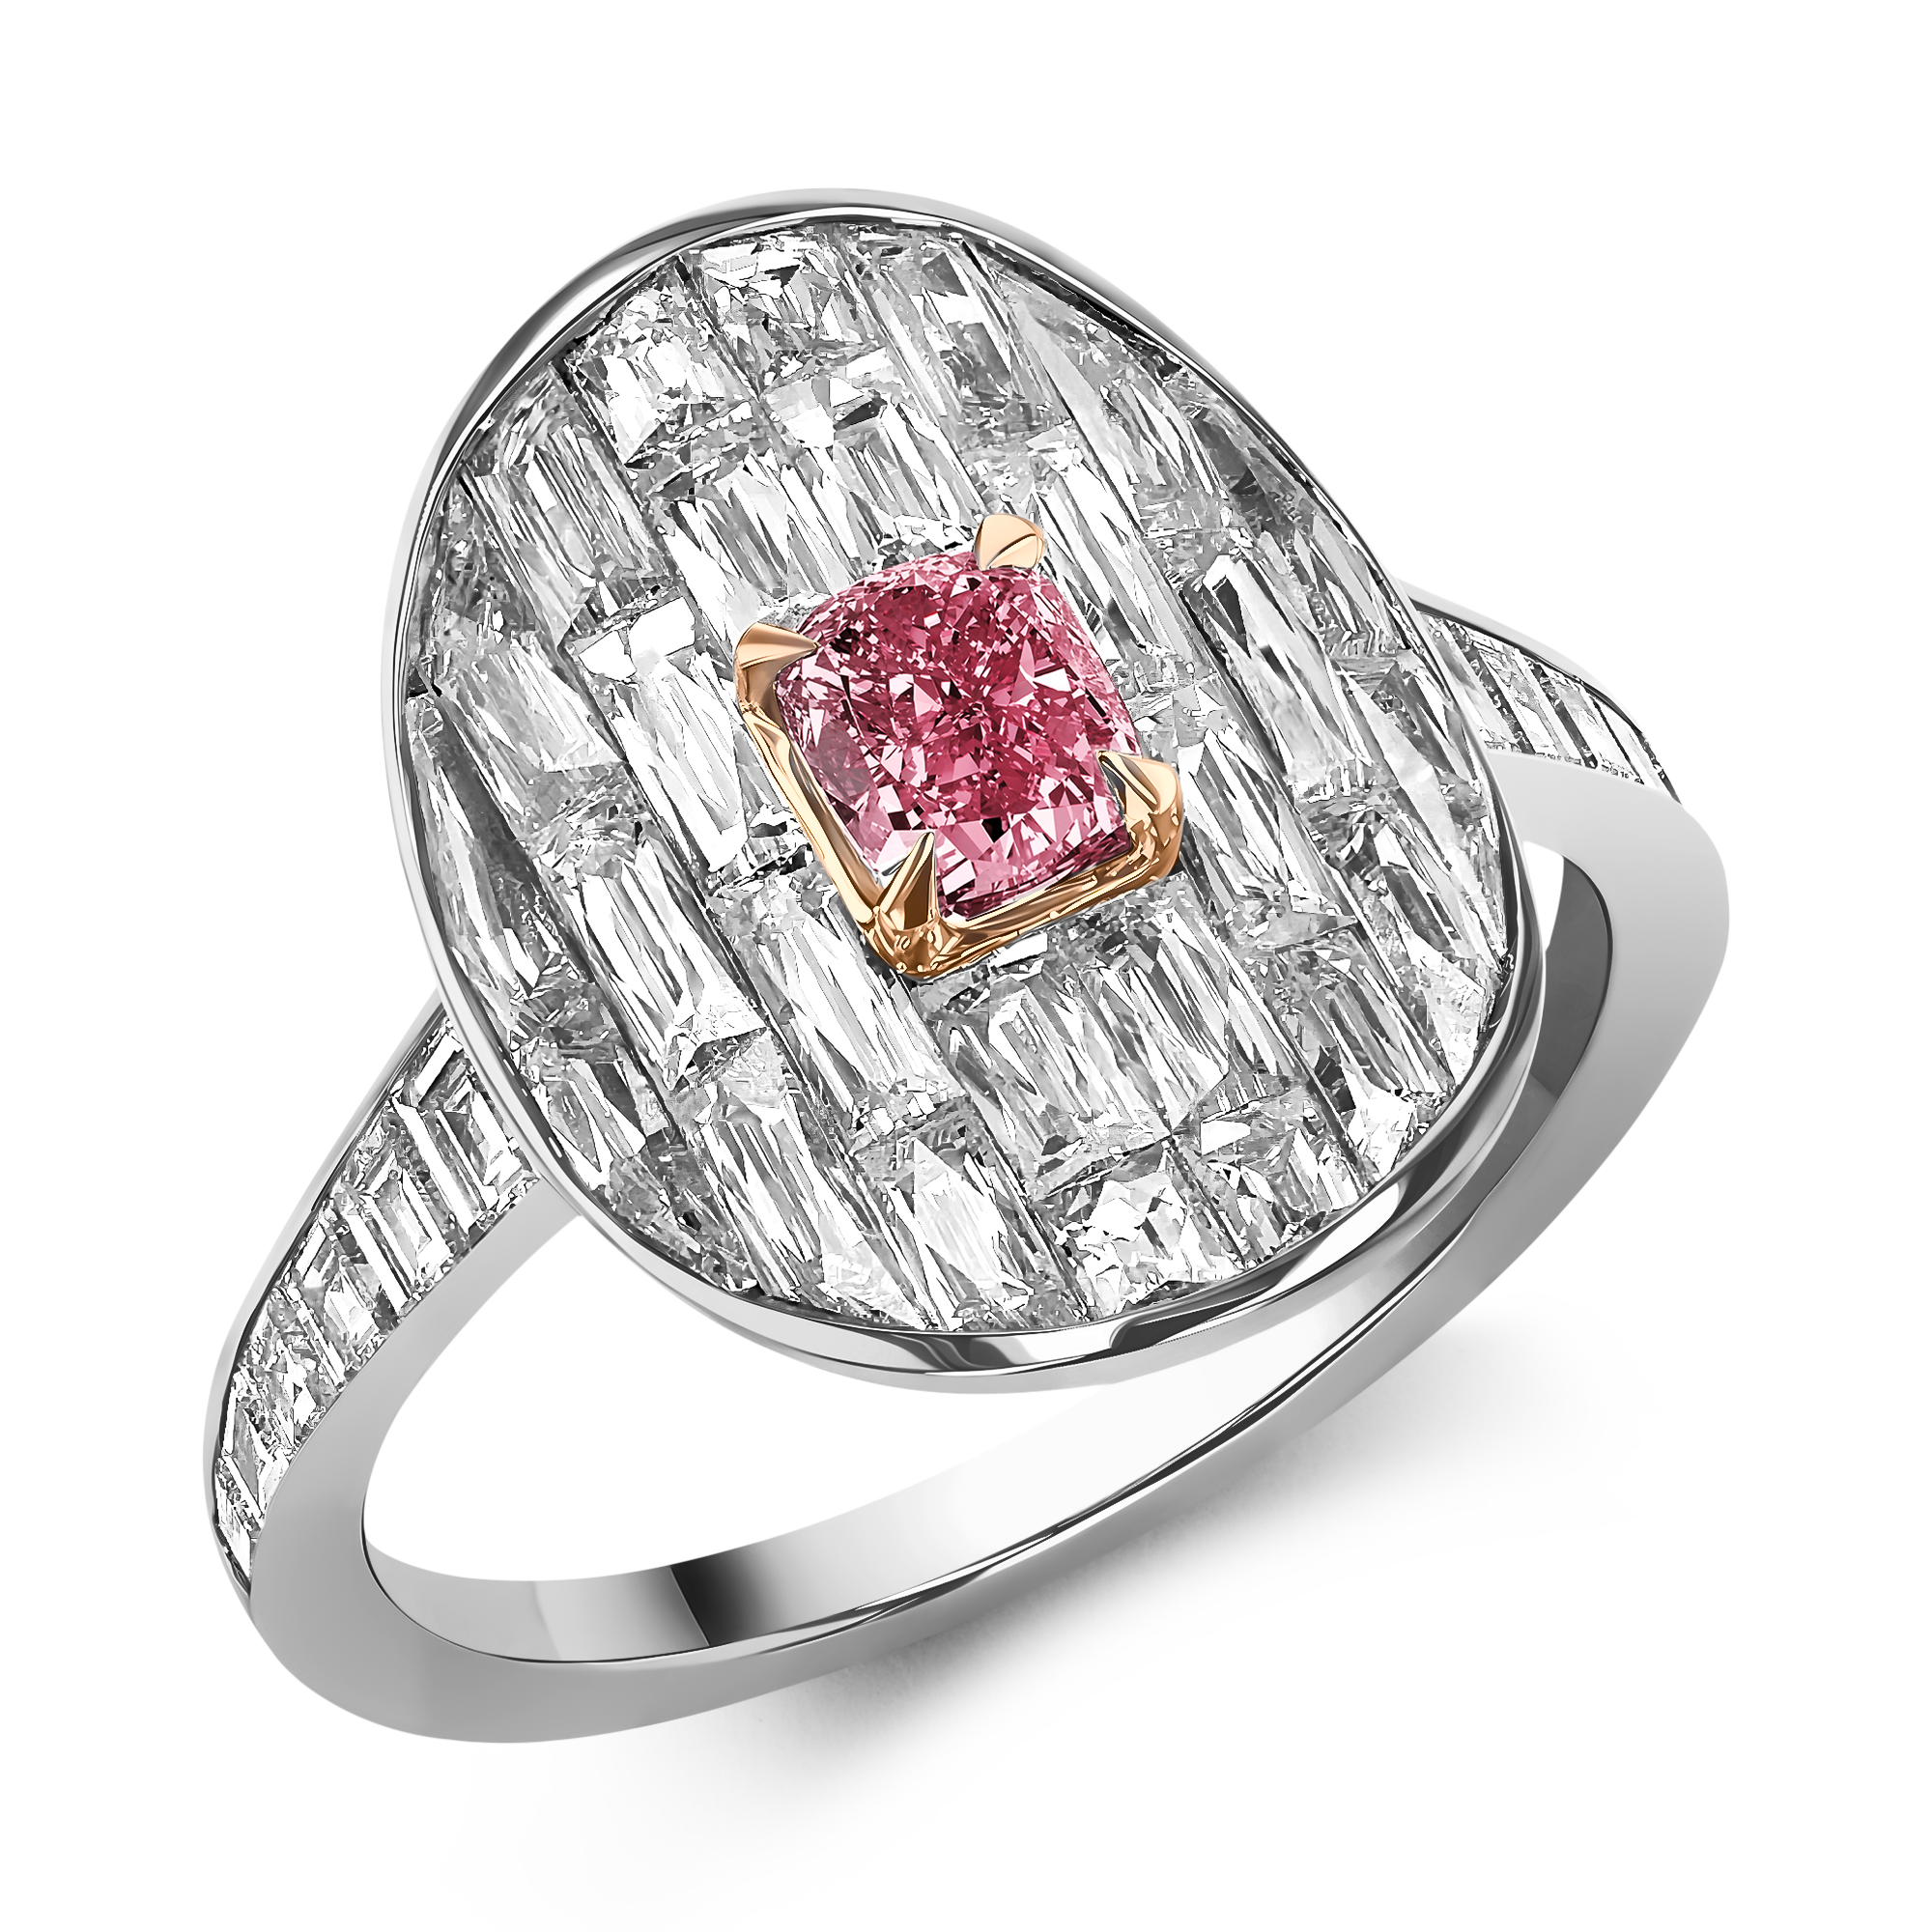 Masterpiece Fancy Vivid Pink Diamond Stage Setting Ring Cushion, French & Carre Cut, Claw & Channel Set_1